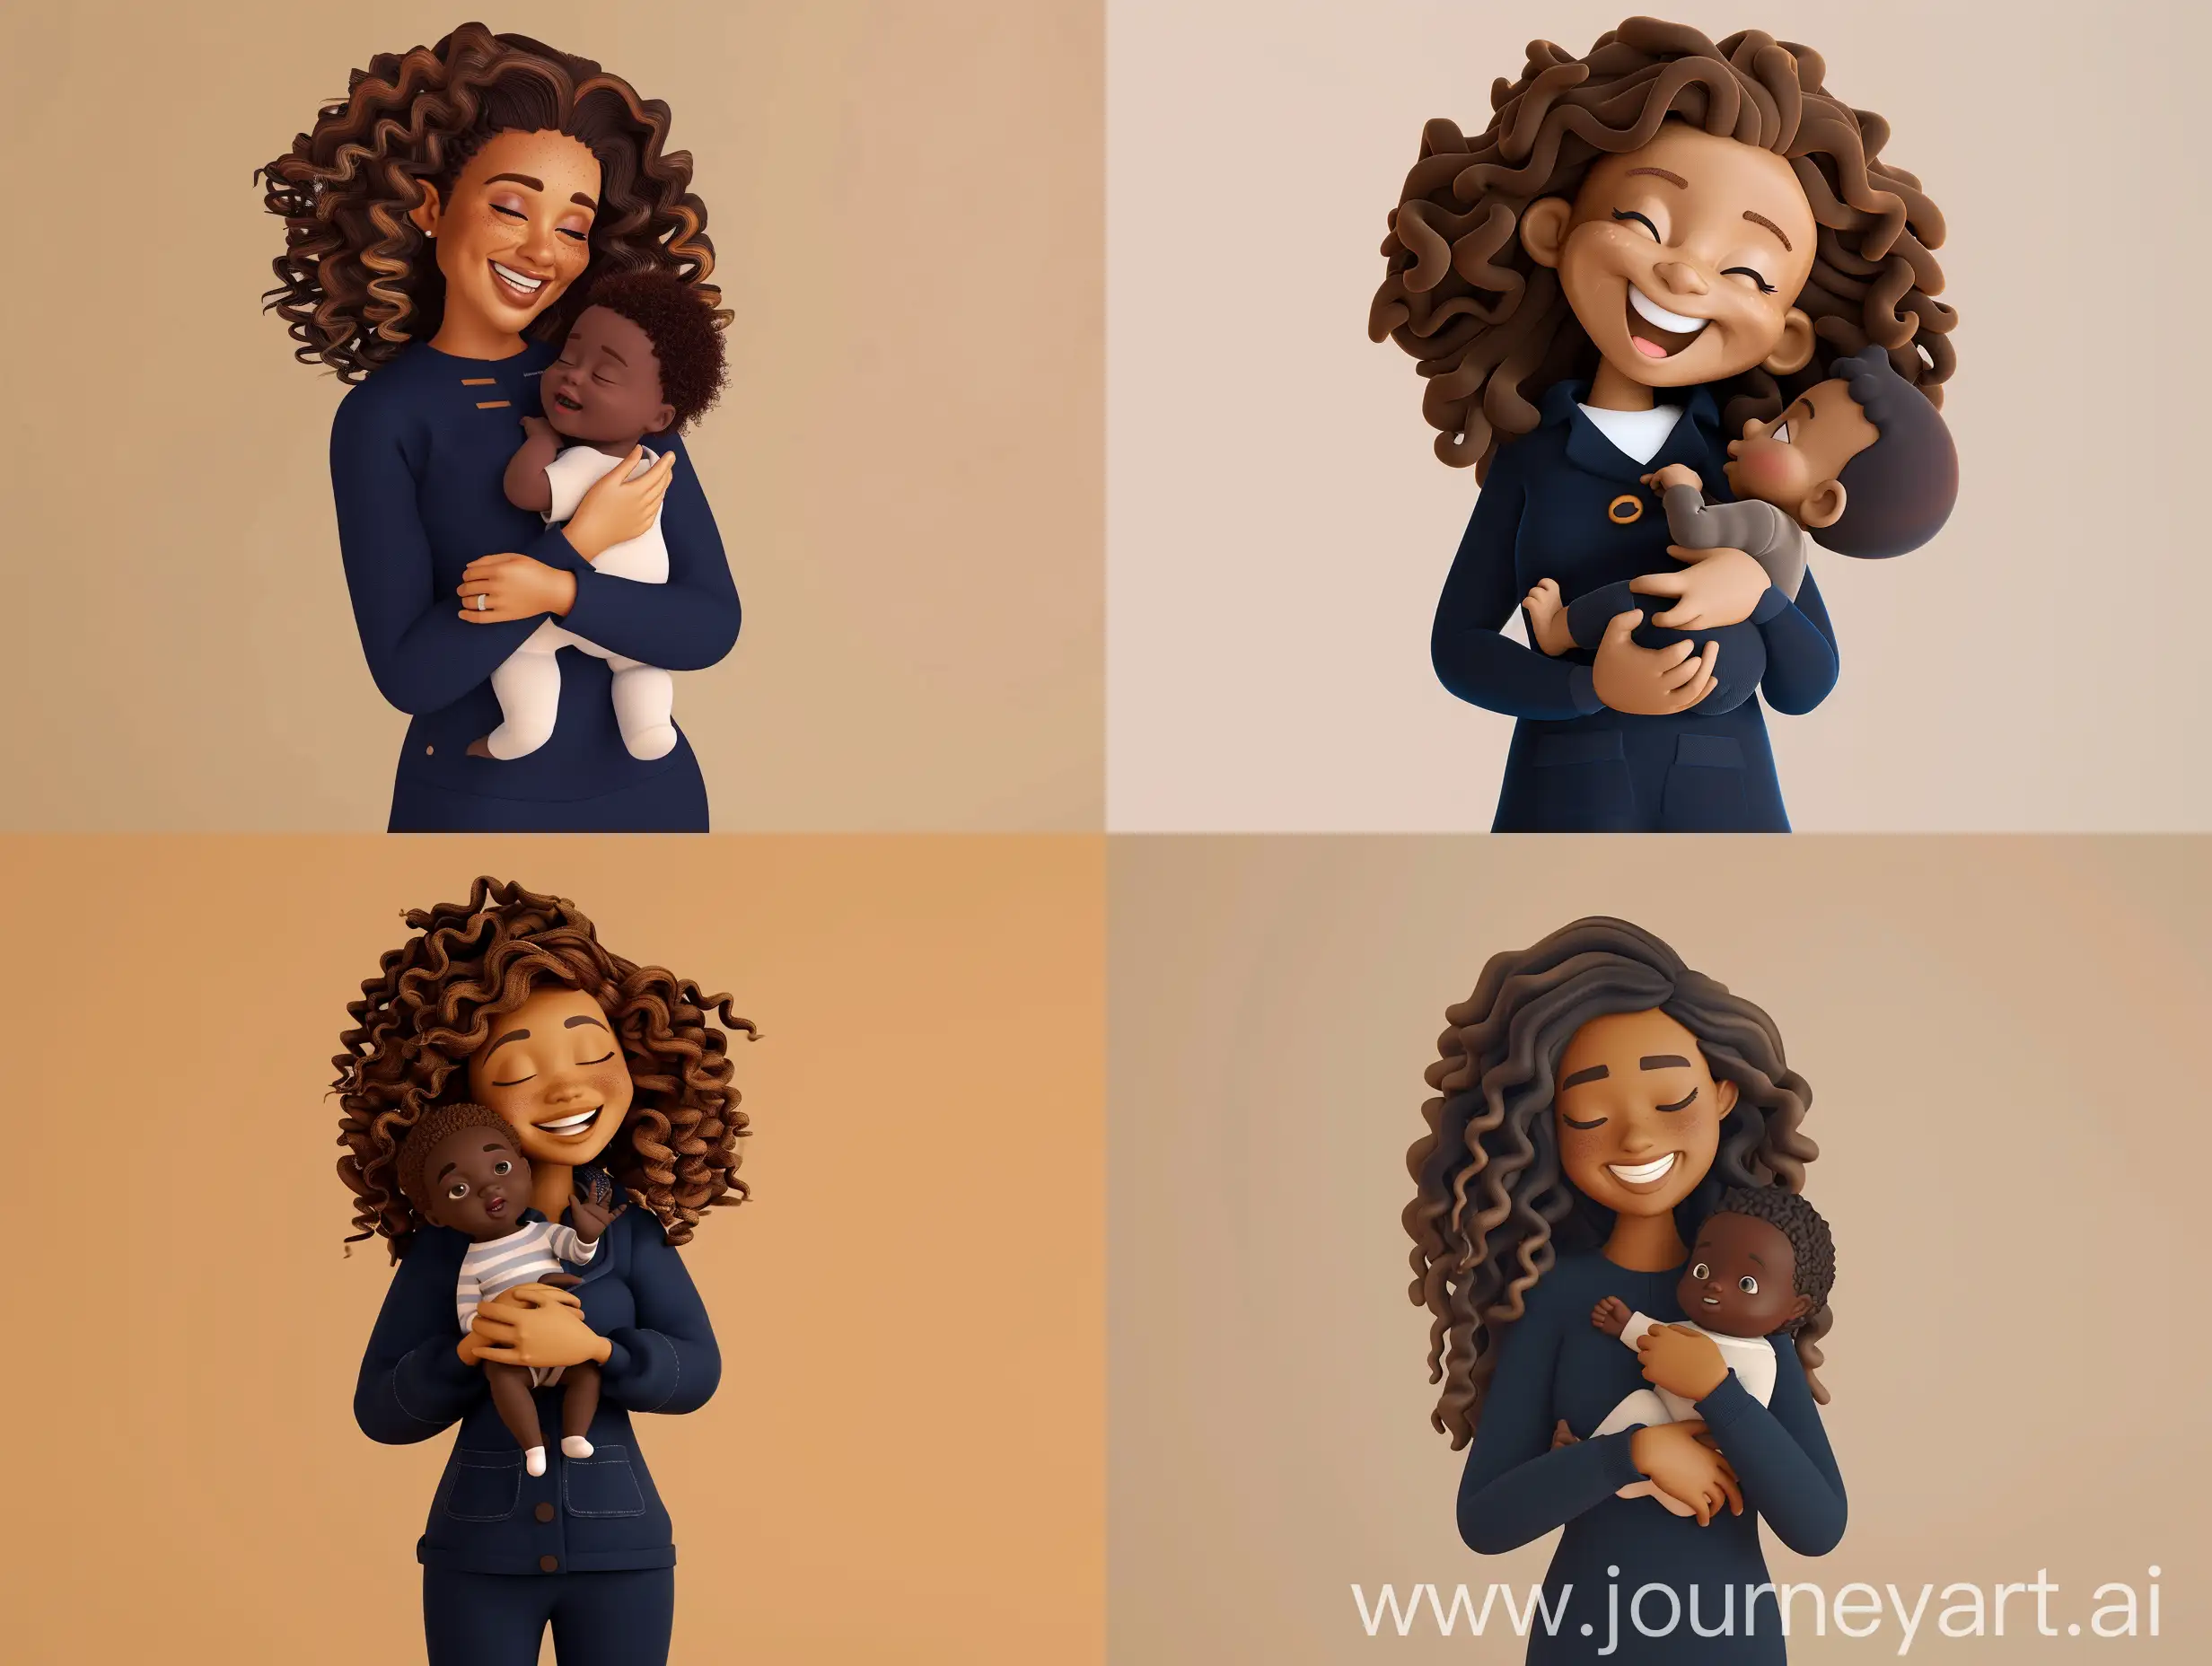 Joyful-Mother-Embracing-DarkSkinned-Baby-in-Navy-Blue-Outfit-Heartwarming-Family-Moment